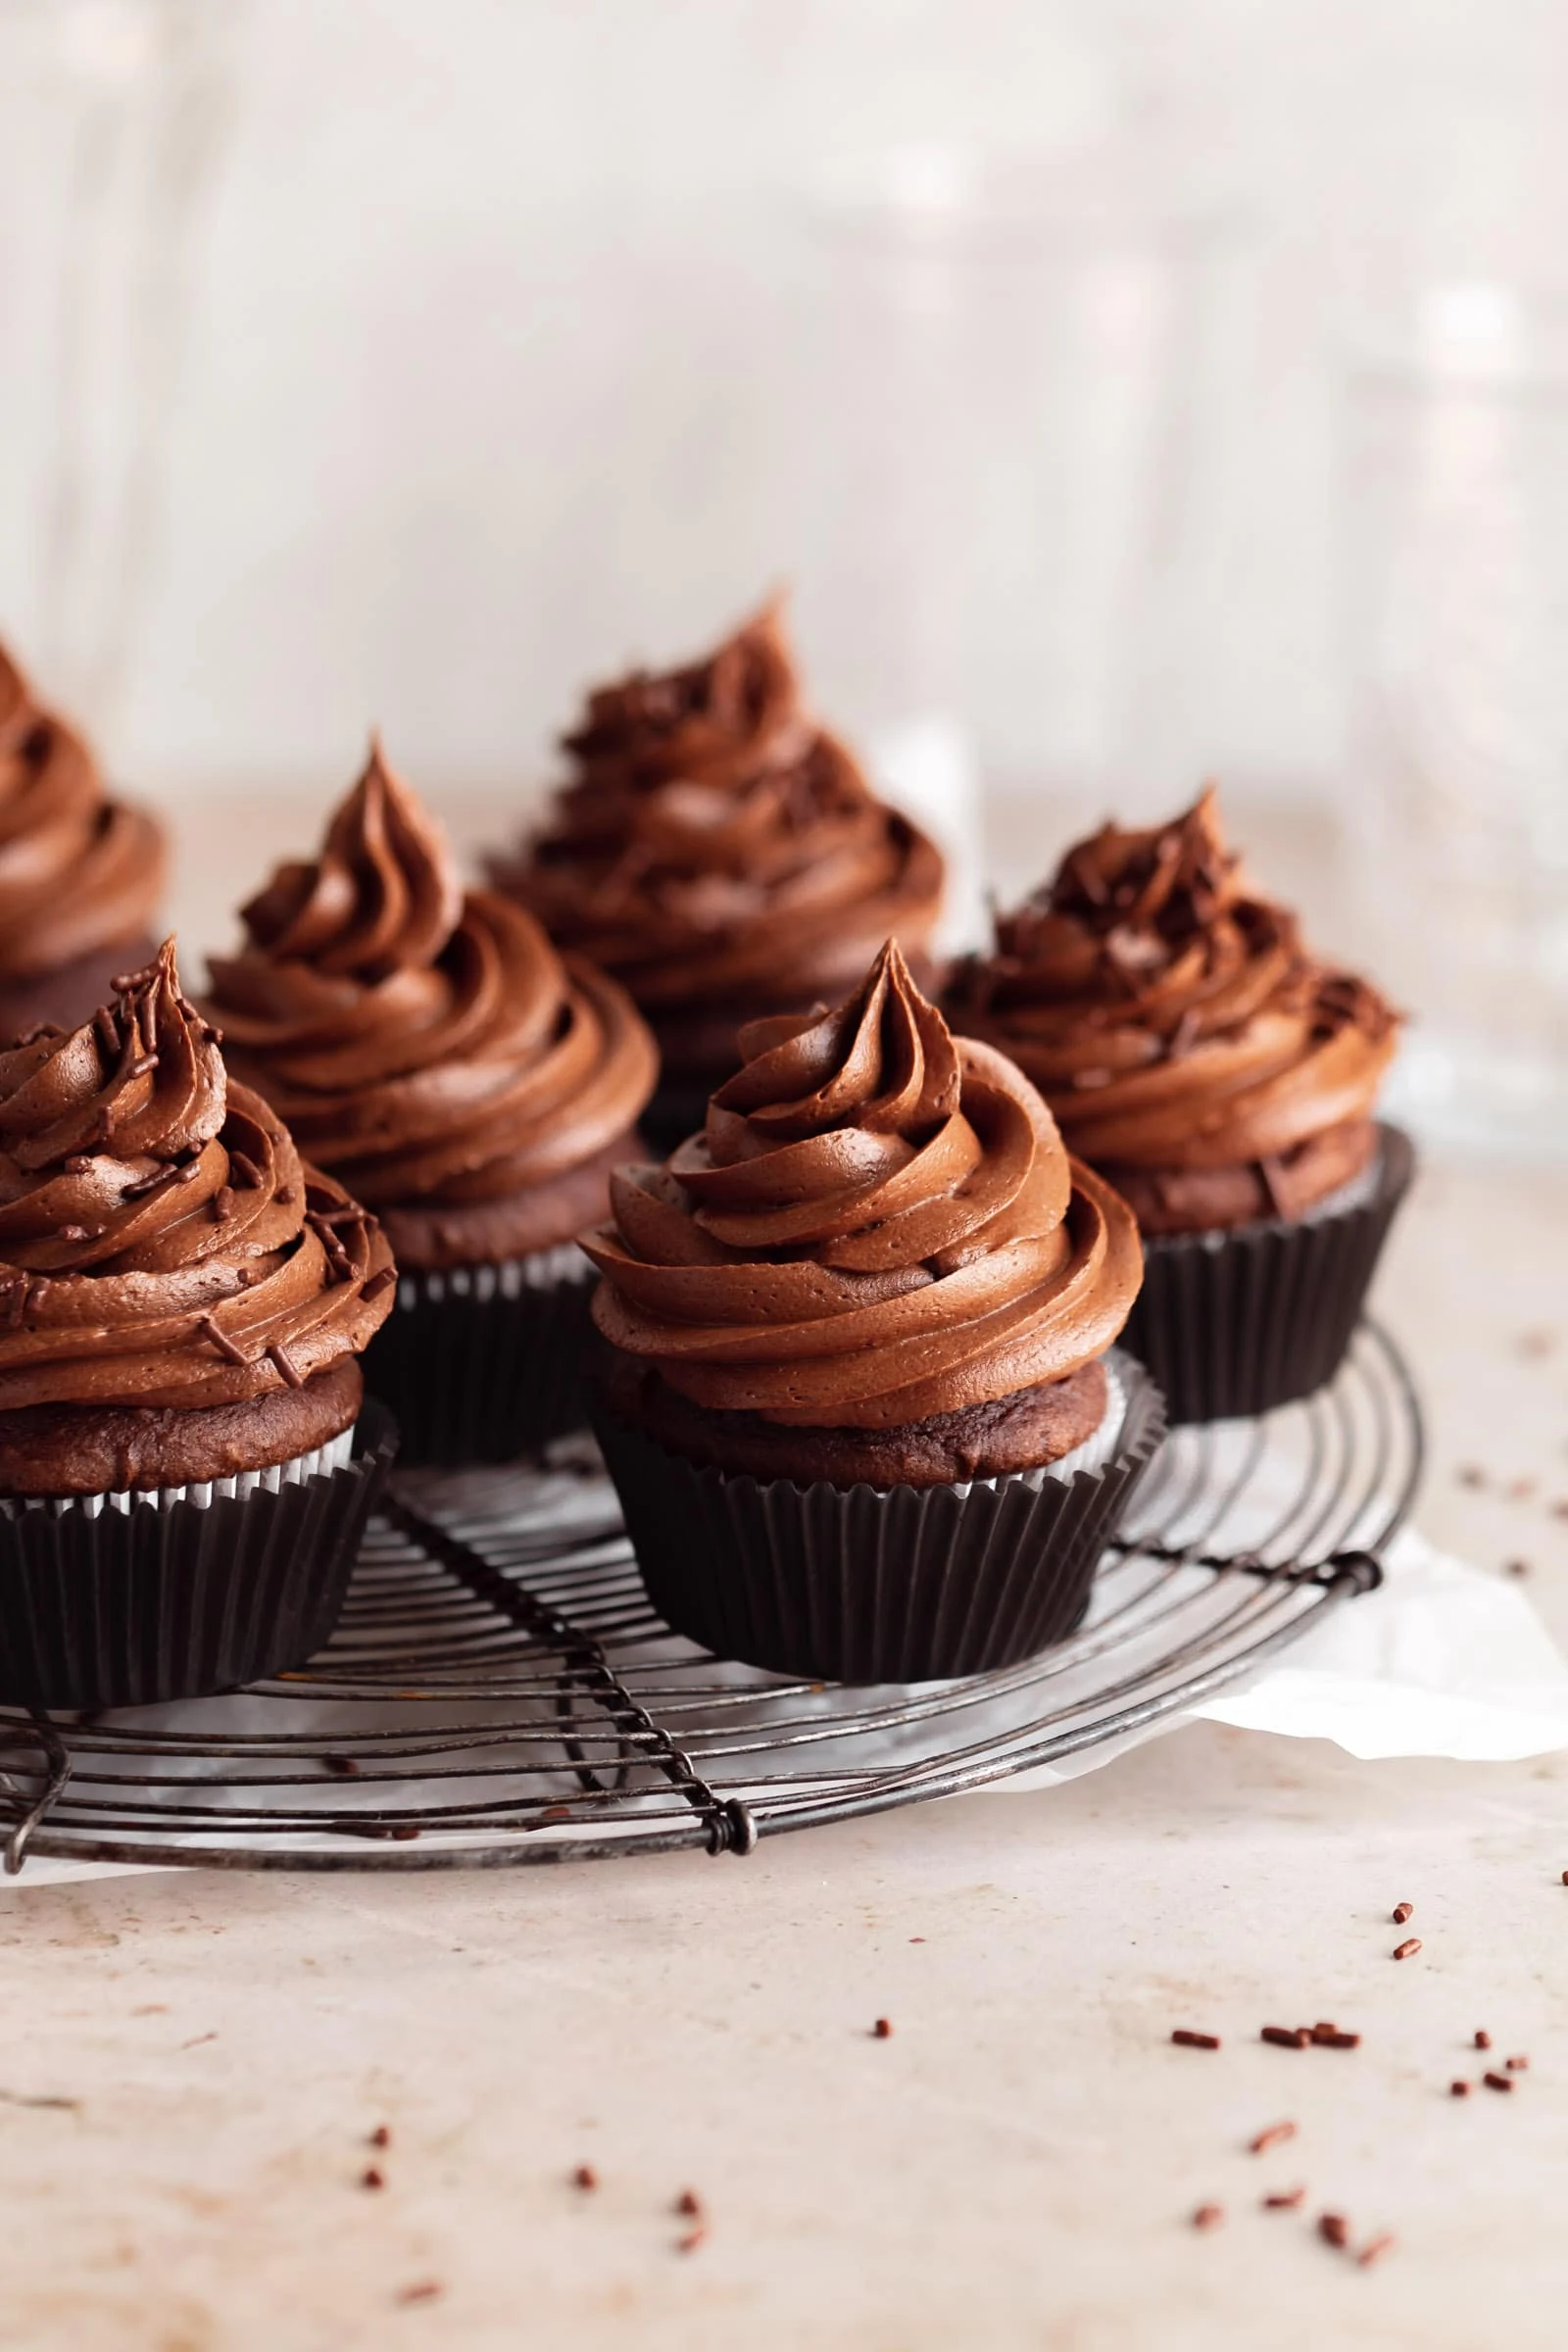 chocolate frosting on chocolate cupcakes